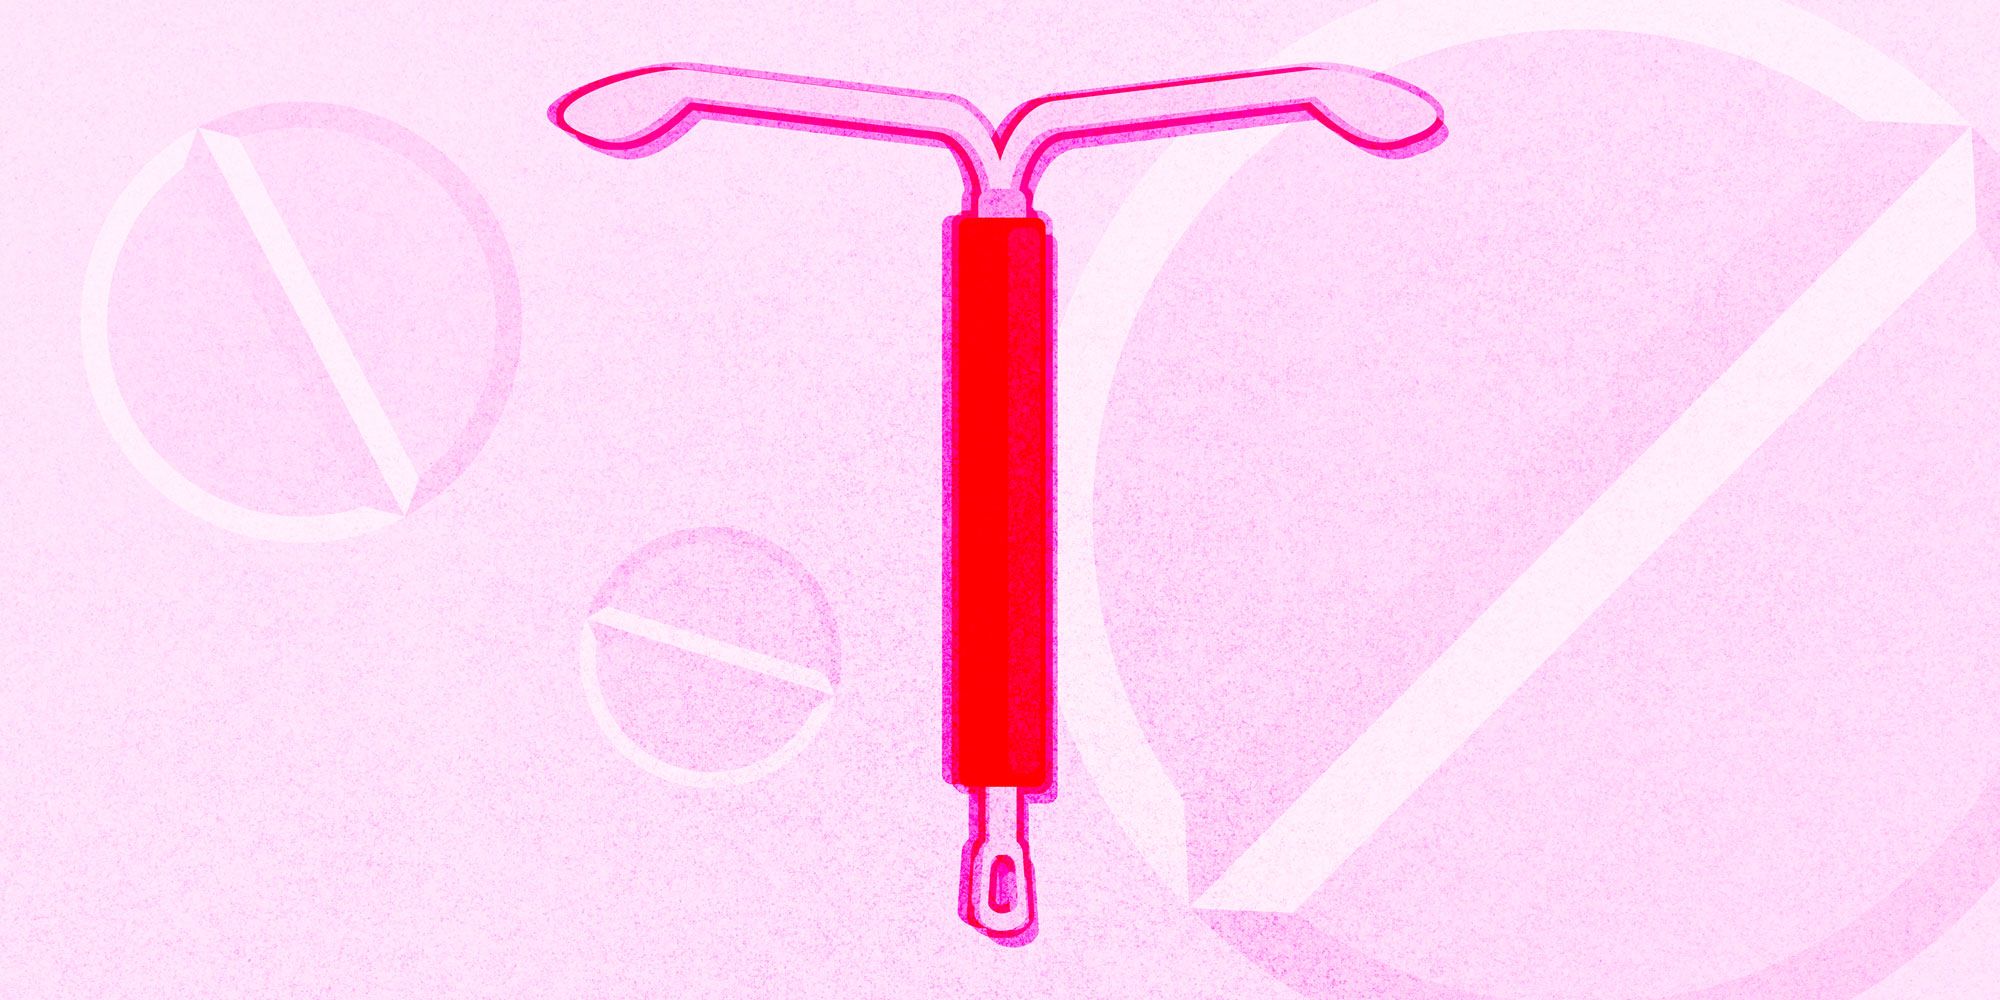 Iud insertion sex. IUD Insertion: A Positive Personal Experience, Side ...